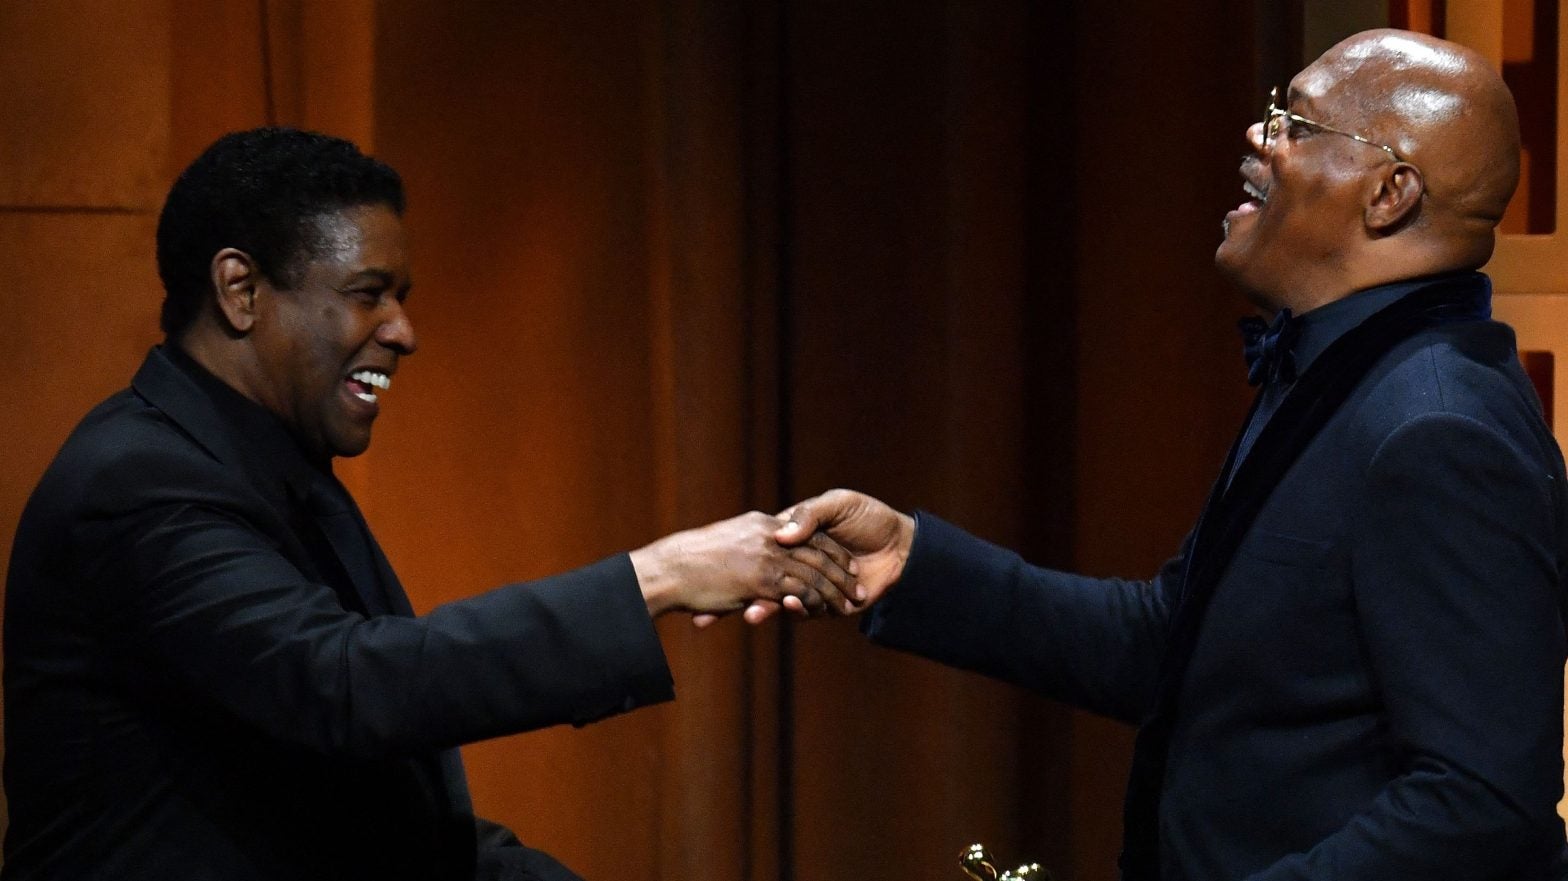 The Brotherhood Is Strong Between Denzel Washington And Samuel L. Jackson At The Governor's Awards